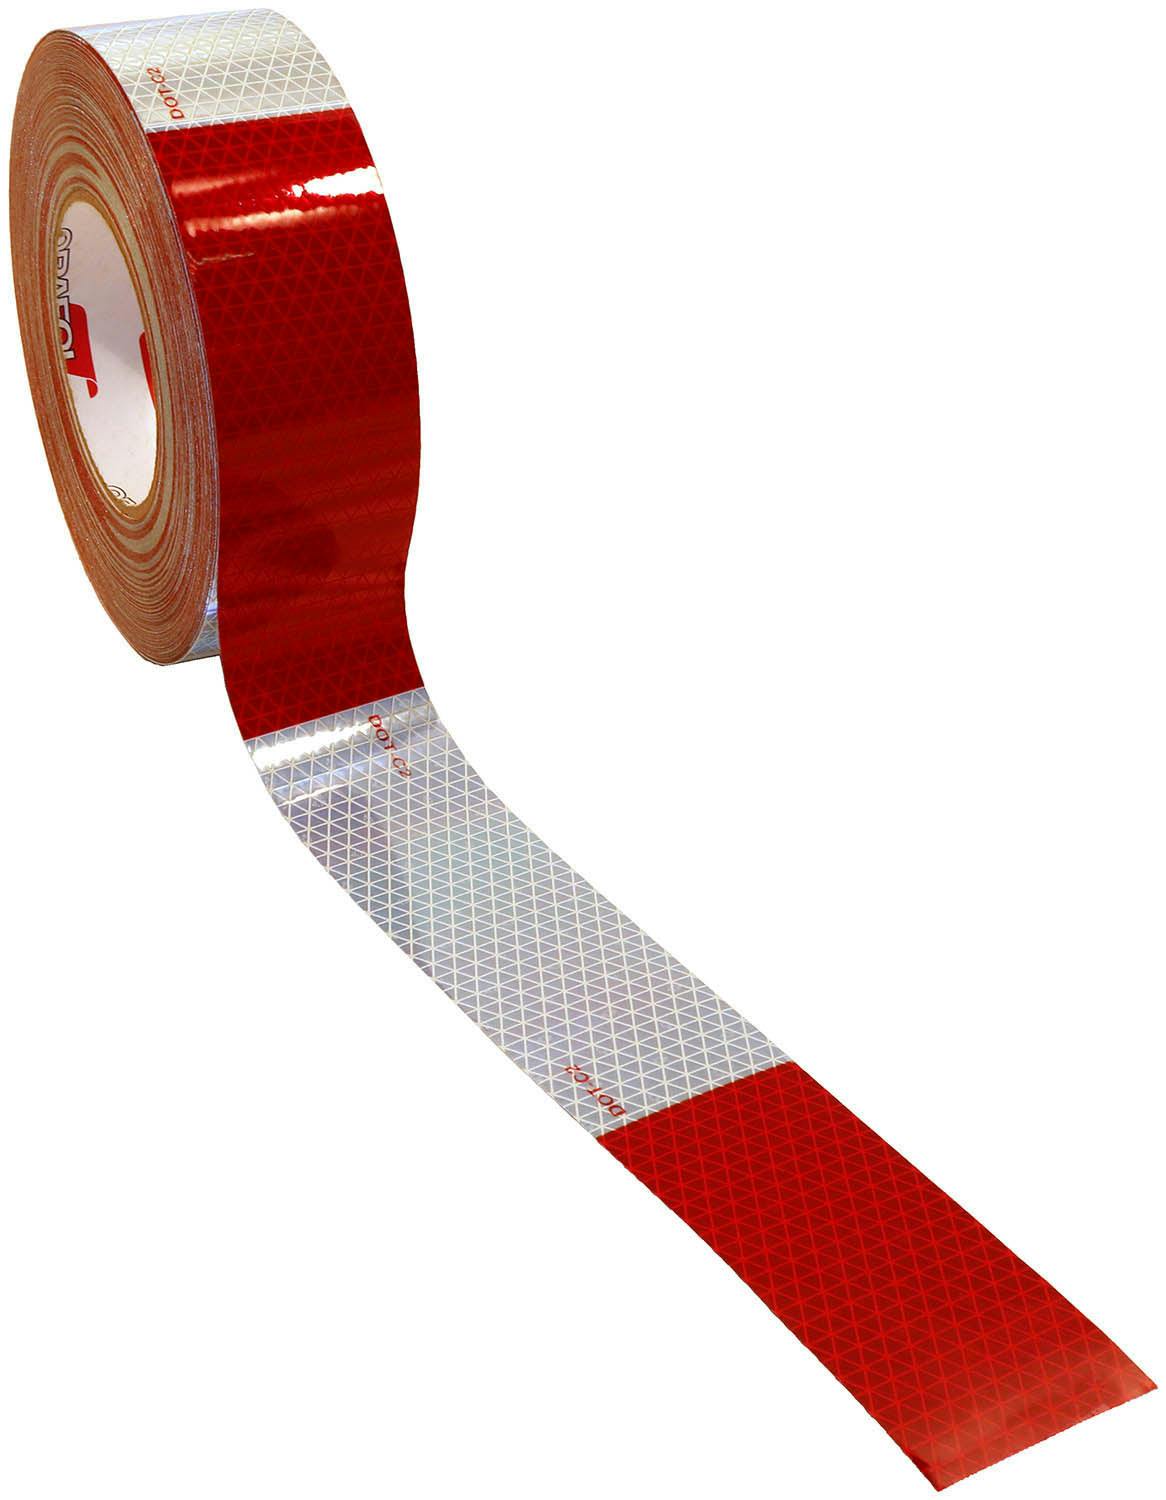 Conspicuity Tape, Red/ White 6/ 6, 600 Cp, 150'L, 2", V92, box - 464-1